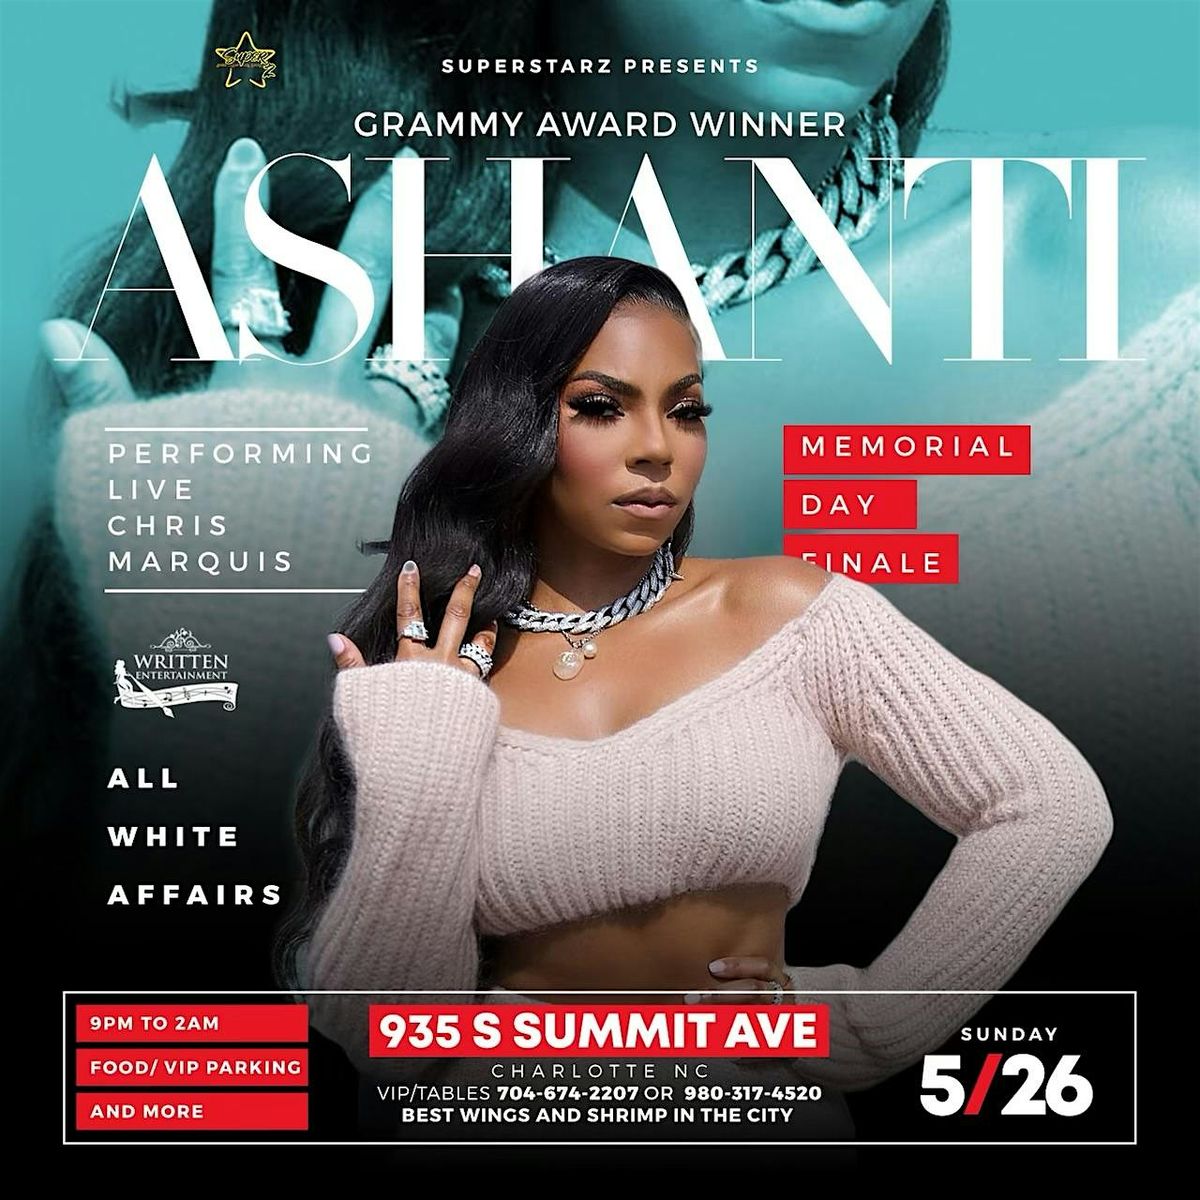 Ashanti may 26th Charlotte Nc for sections 980-317-4520